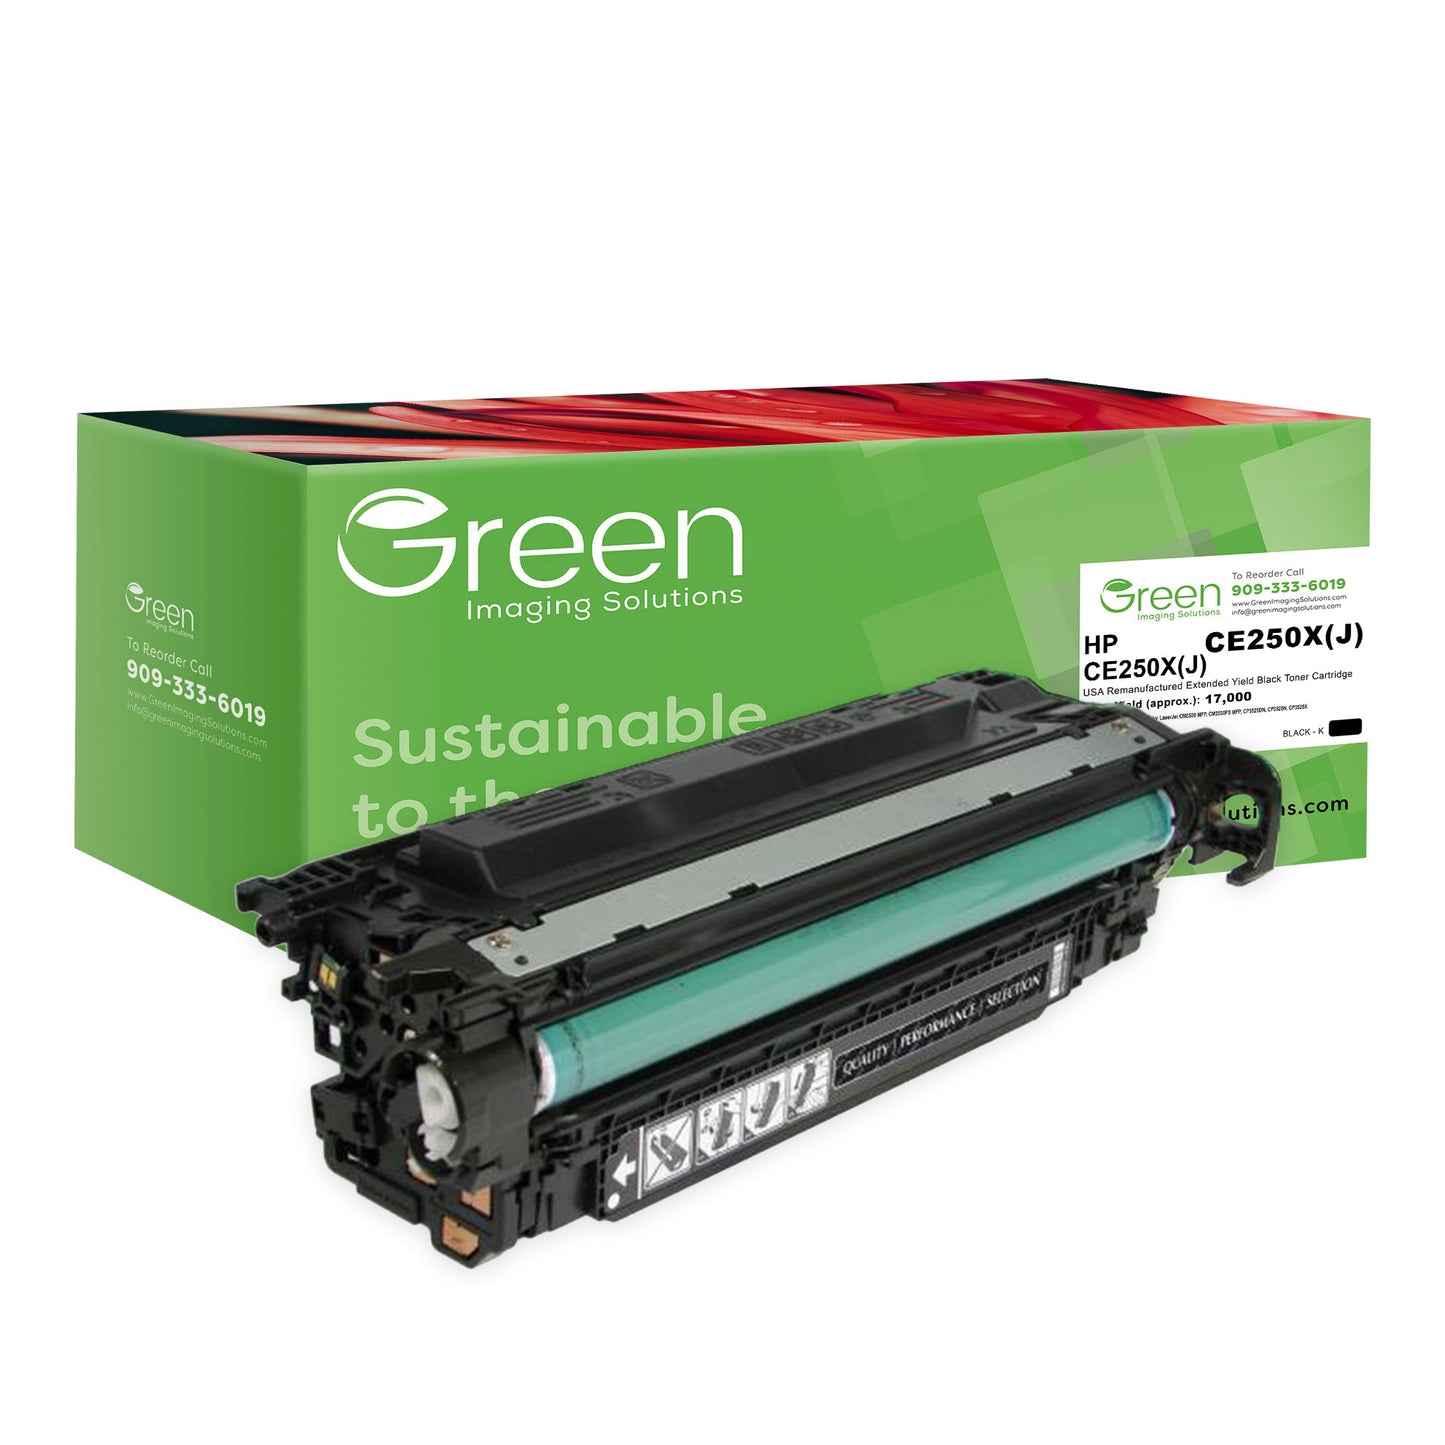 GIS USA Remanufactured Extended Yield Black Toner Cartridge for HP CE250X